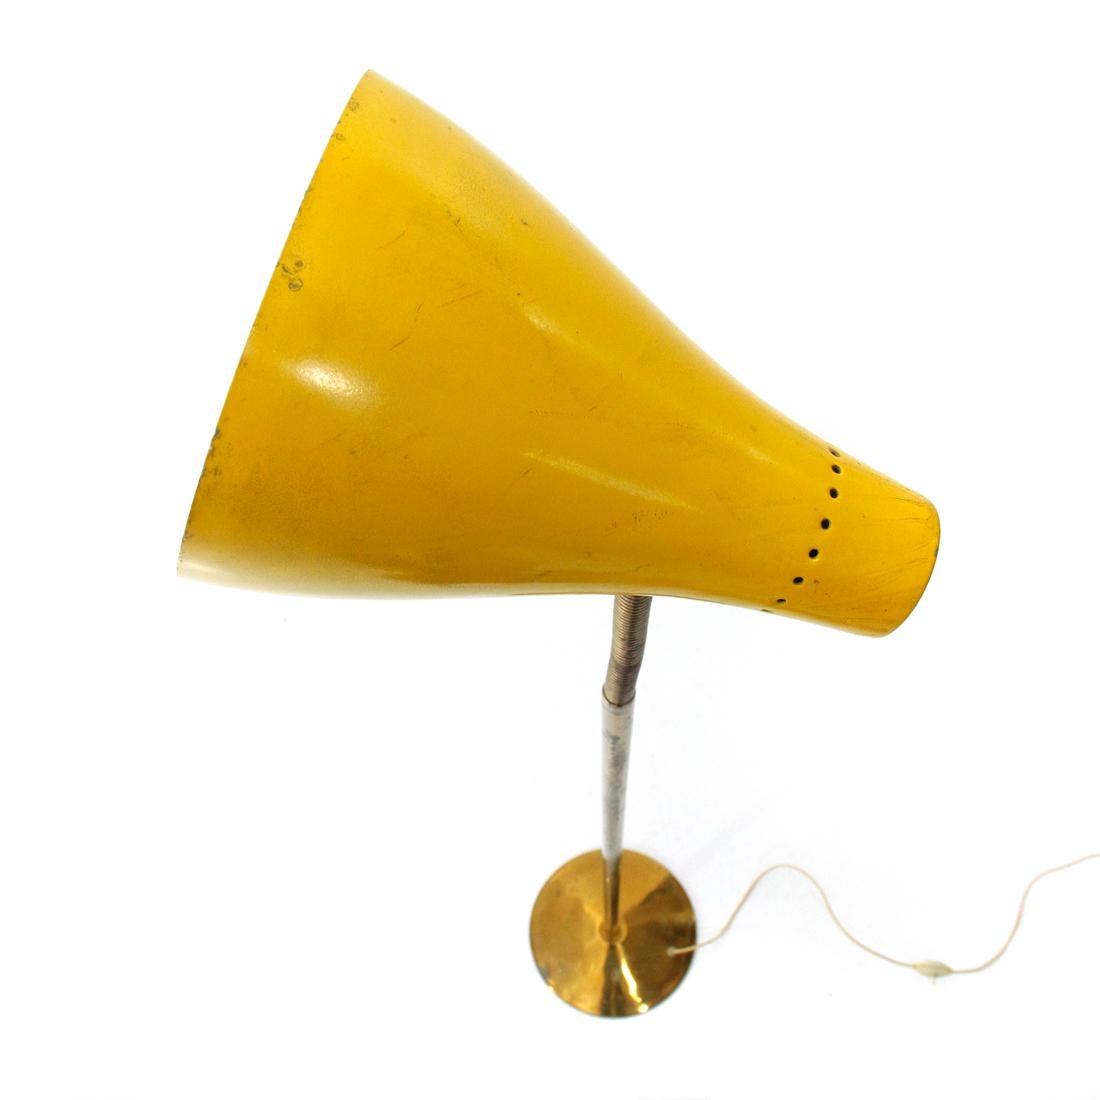 Mid-Century Modern Floor Lamp in Brass and Yellow Diffuser, 1950s